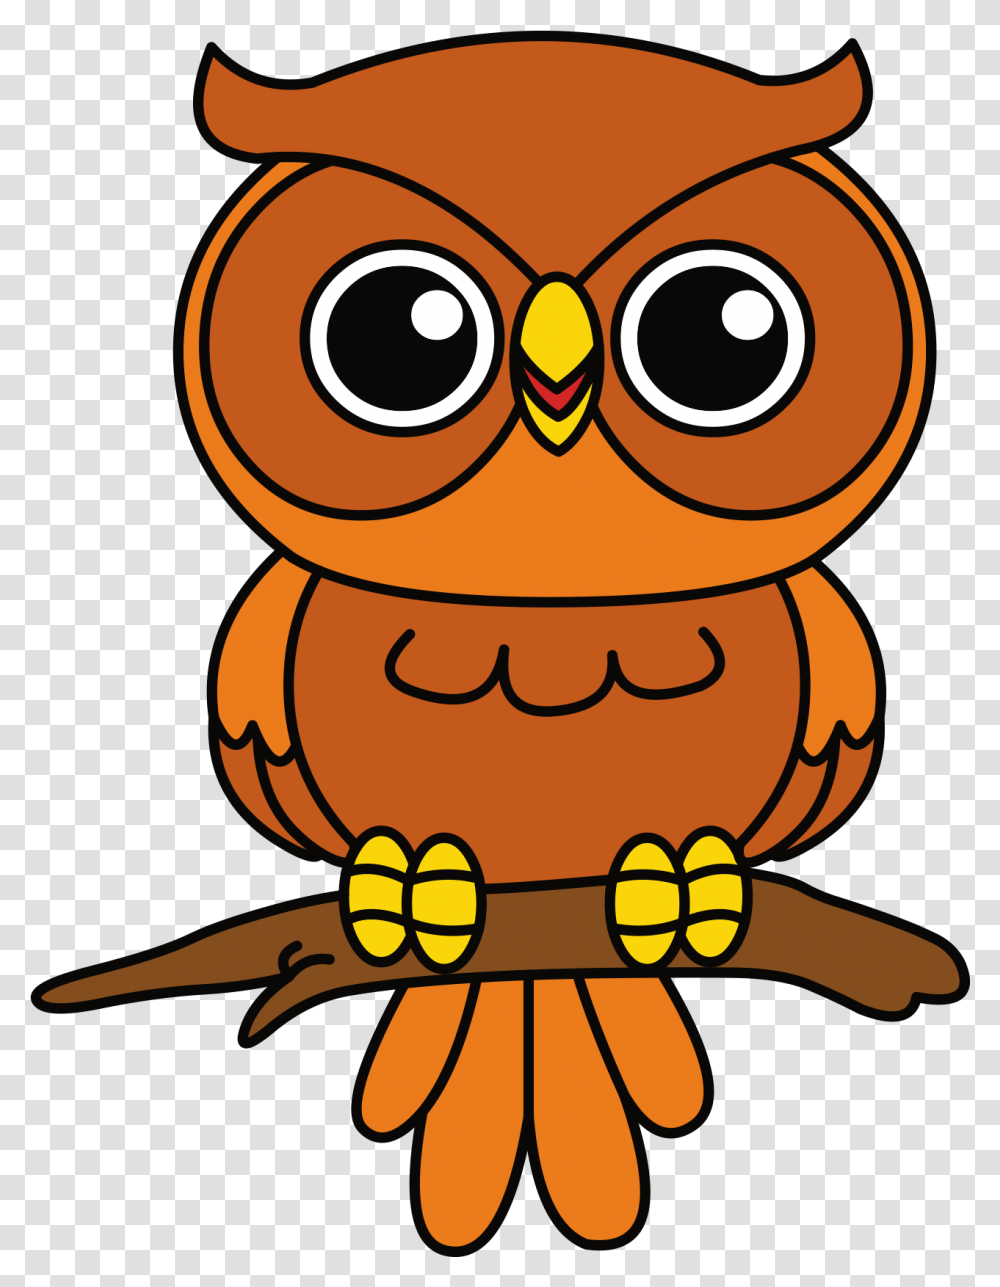 Ovo Owl Image For Nightowl, Silhouette, Face, Costume, Alien Transparent Png